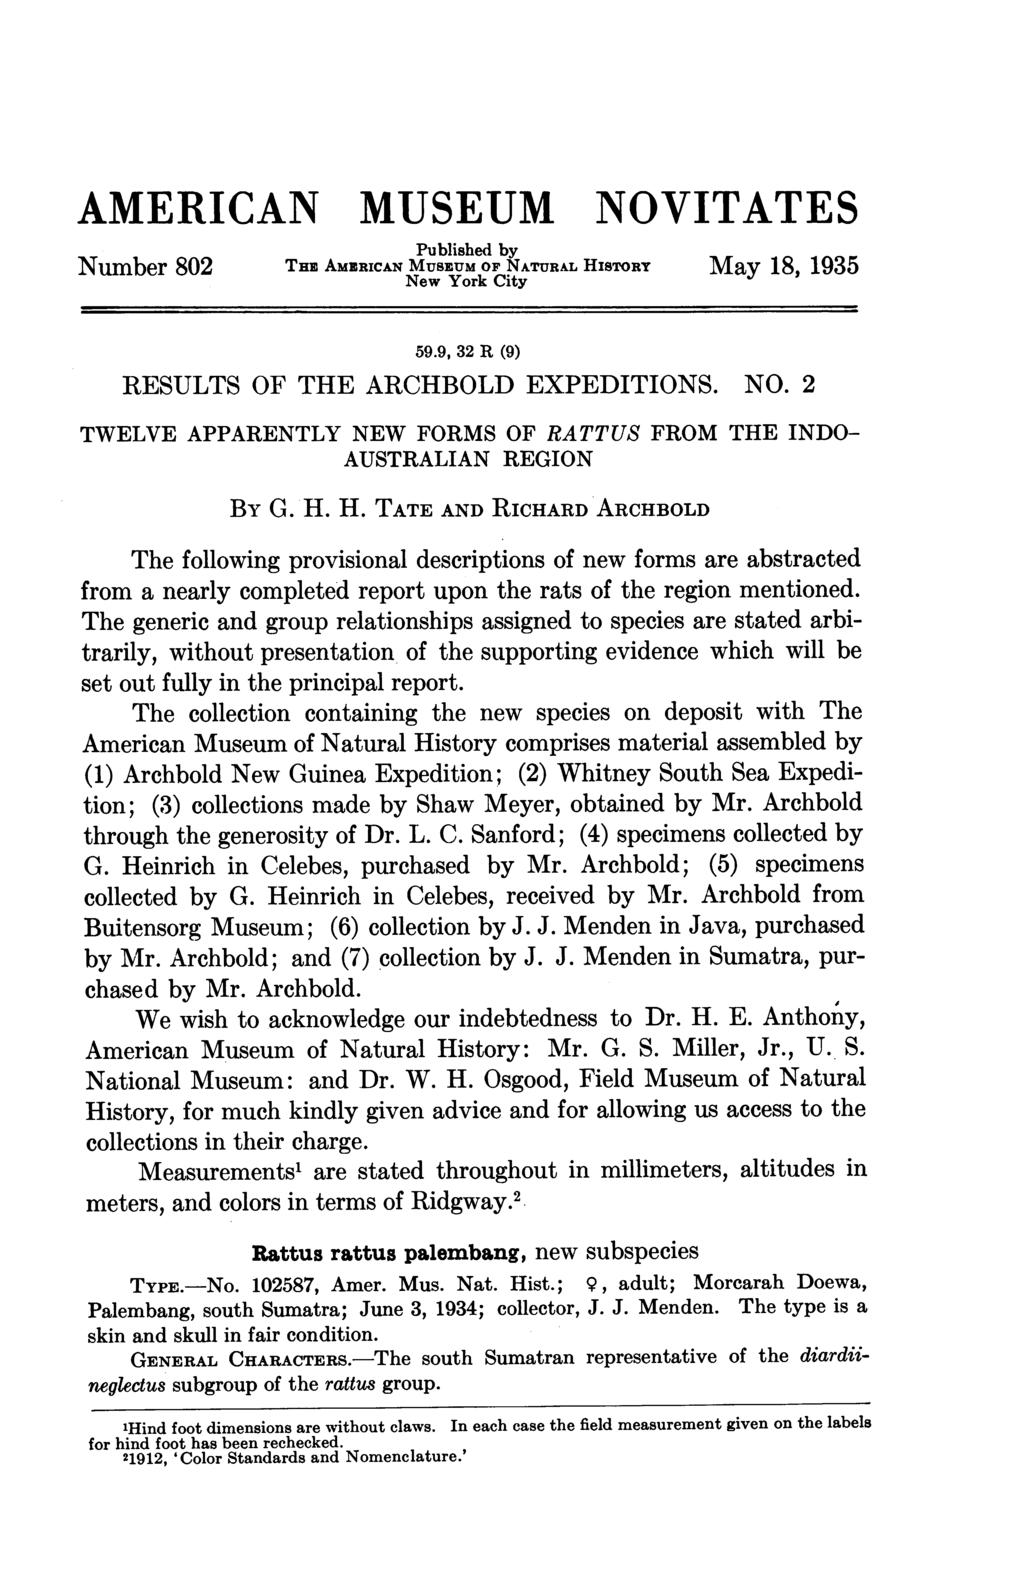 AMERICAN MUSEUM NOVITATES Publiished by Number 802 THU AmERICAN Mueum of NATURAL HISTORY May 18, 1935 New York City 59.9, 32 R (9) RESULTS OF THE ARCHBOLD EXPEDITIONS. NO. 2 TWELVE APPARENTLY NEW FORMS OF RATTUS FROM THE INDO- AUSTRALIAN REGION BY G.